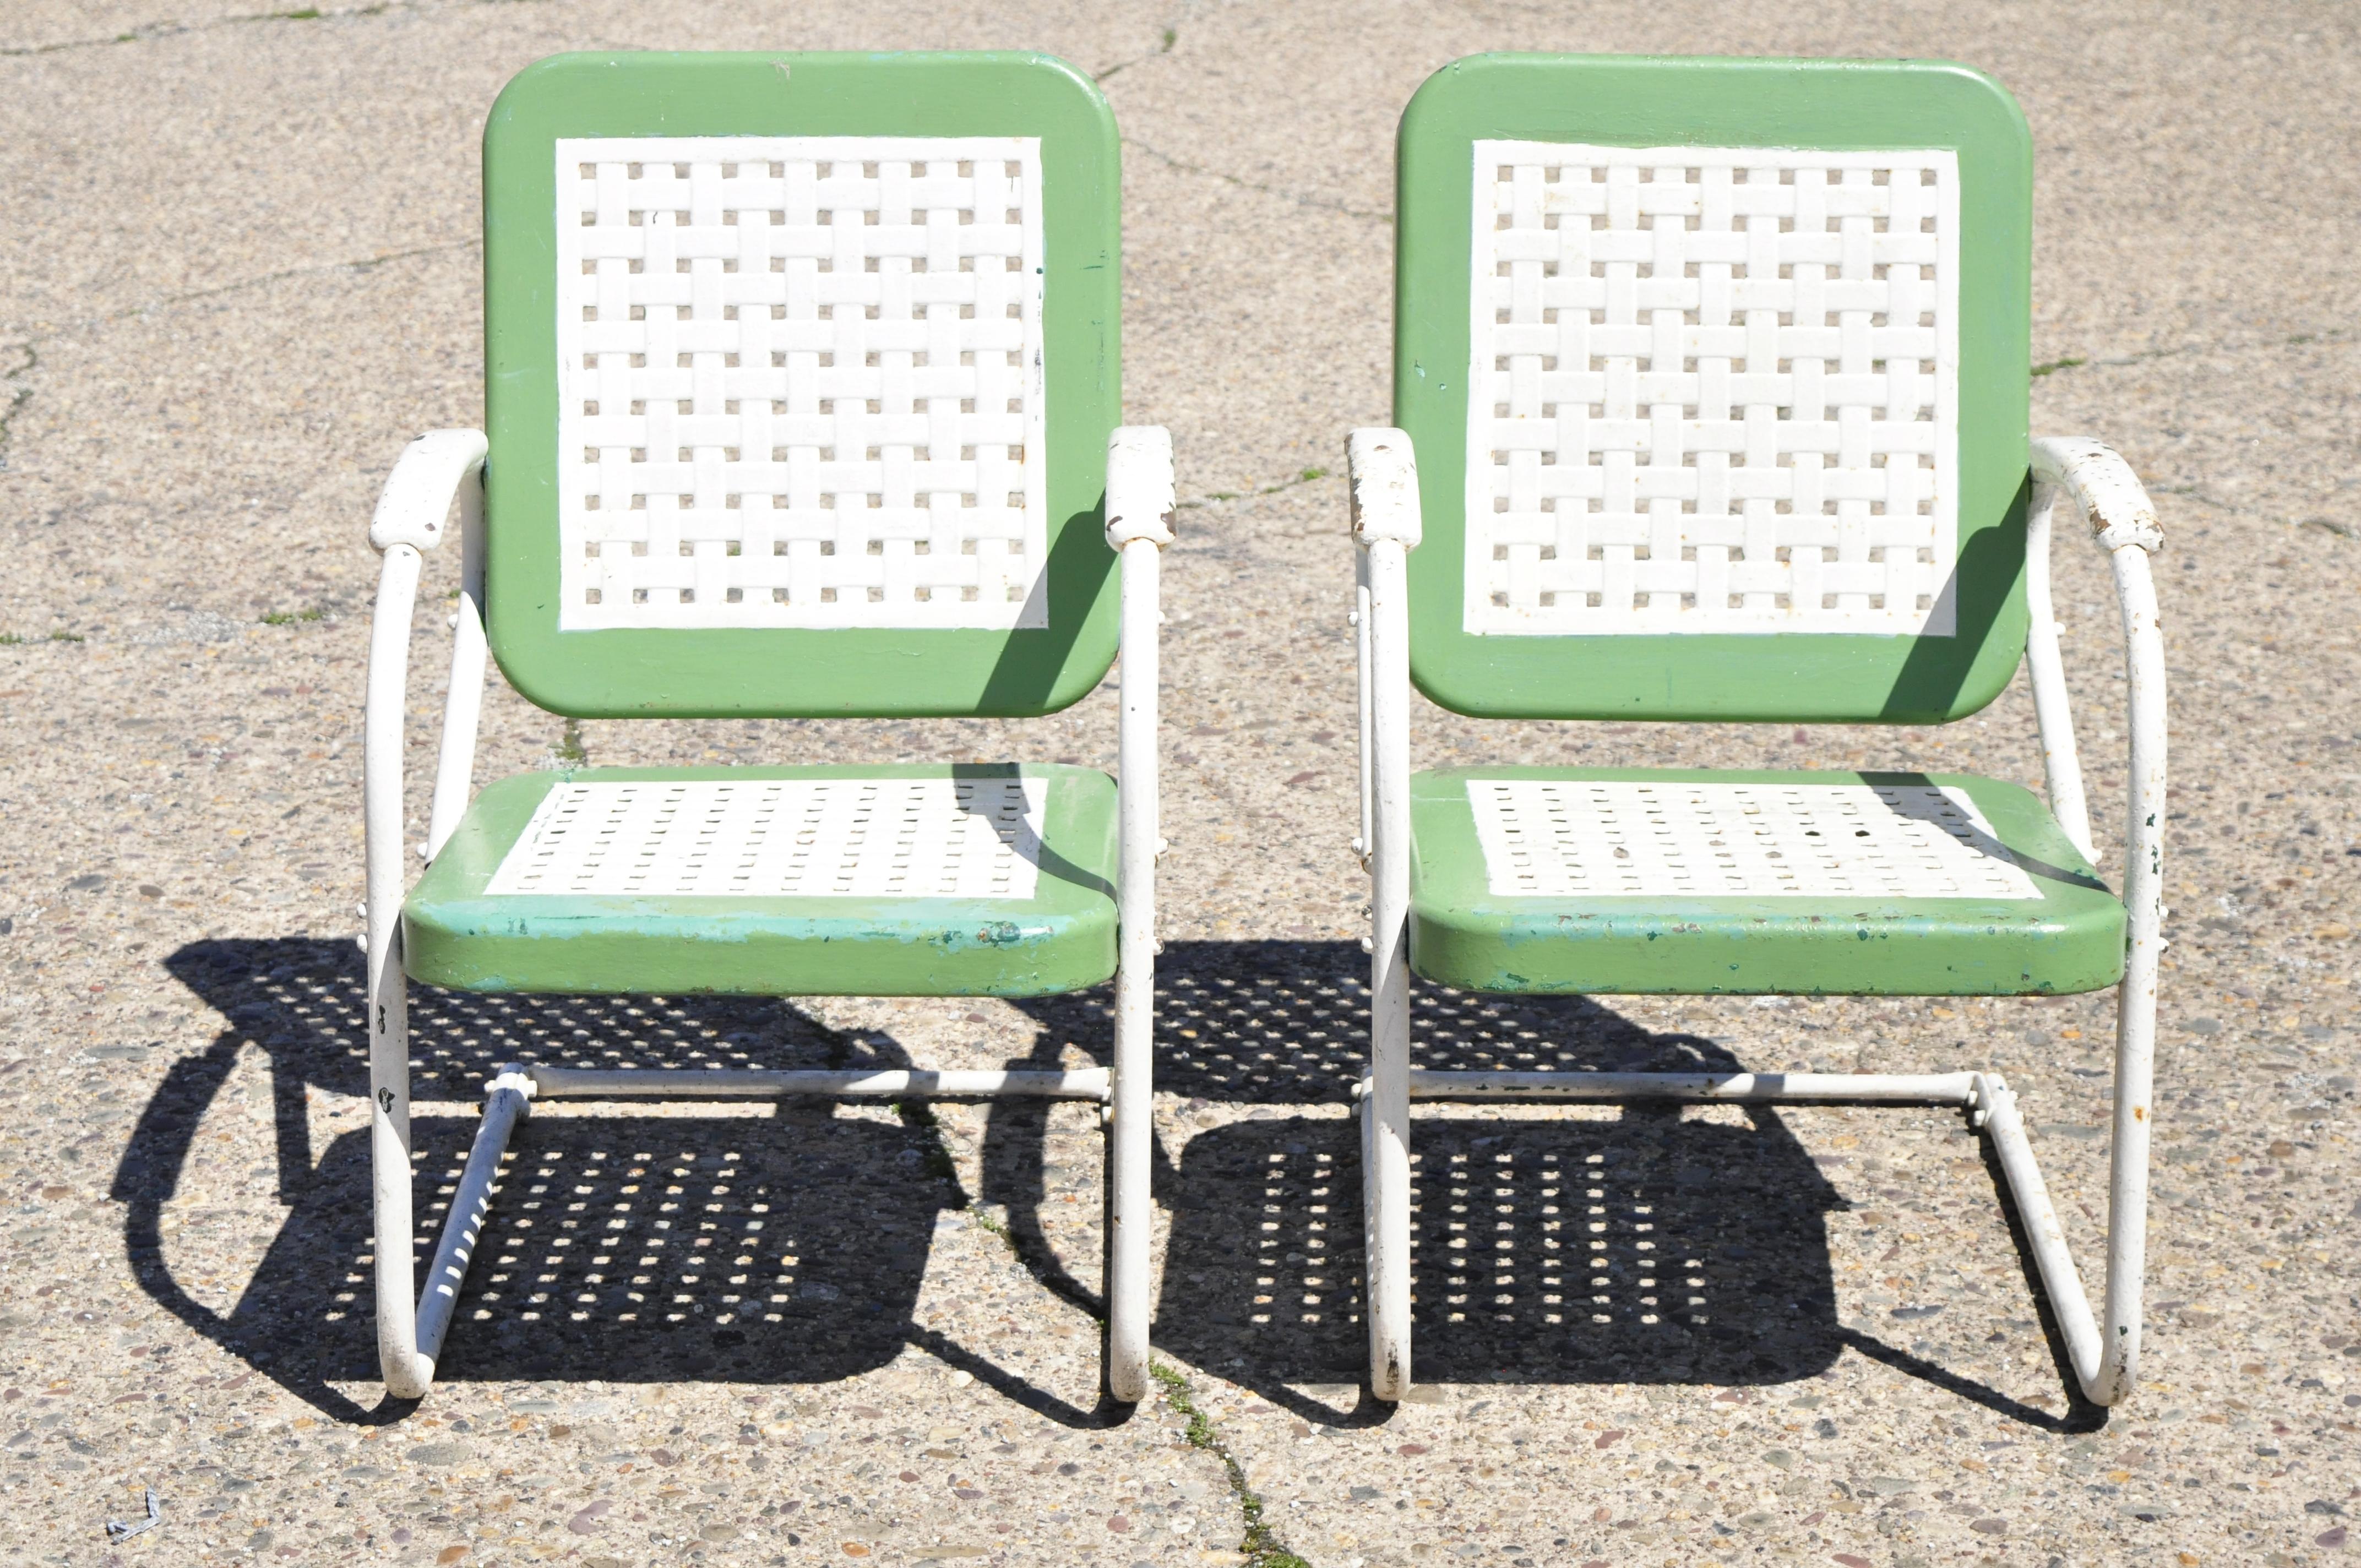 Vintage Art Deco metal basketweave old green porch outdoor spring arm chairs - pair. Item features original green and white painted finish, woven basket weave seat and back, metal frames, very nice antique chairs, quality American craftsmanship,